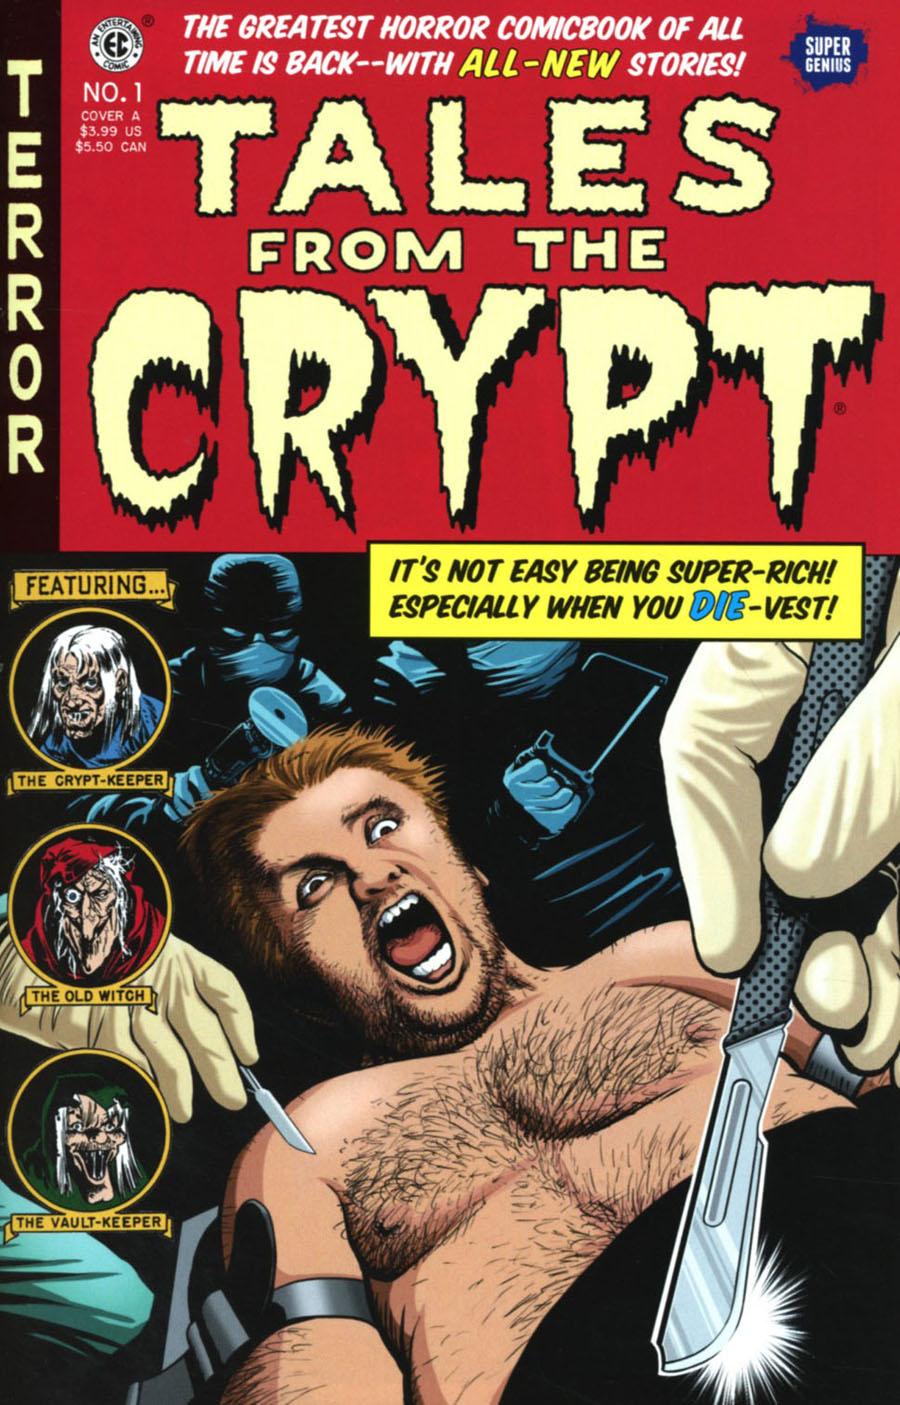 Tales From The Crypt Vol. 3 #1